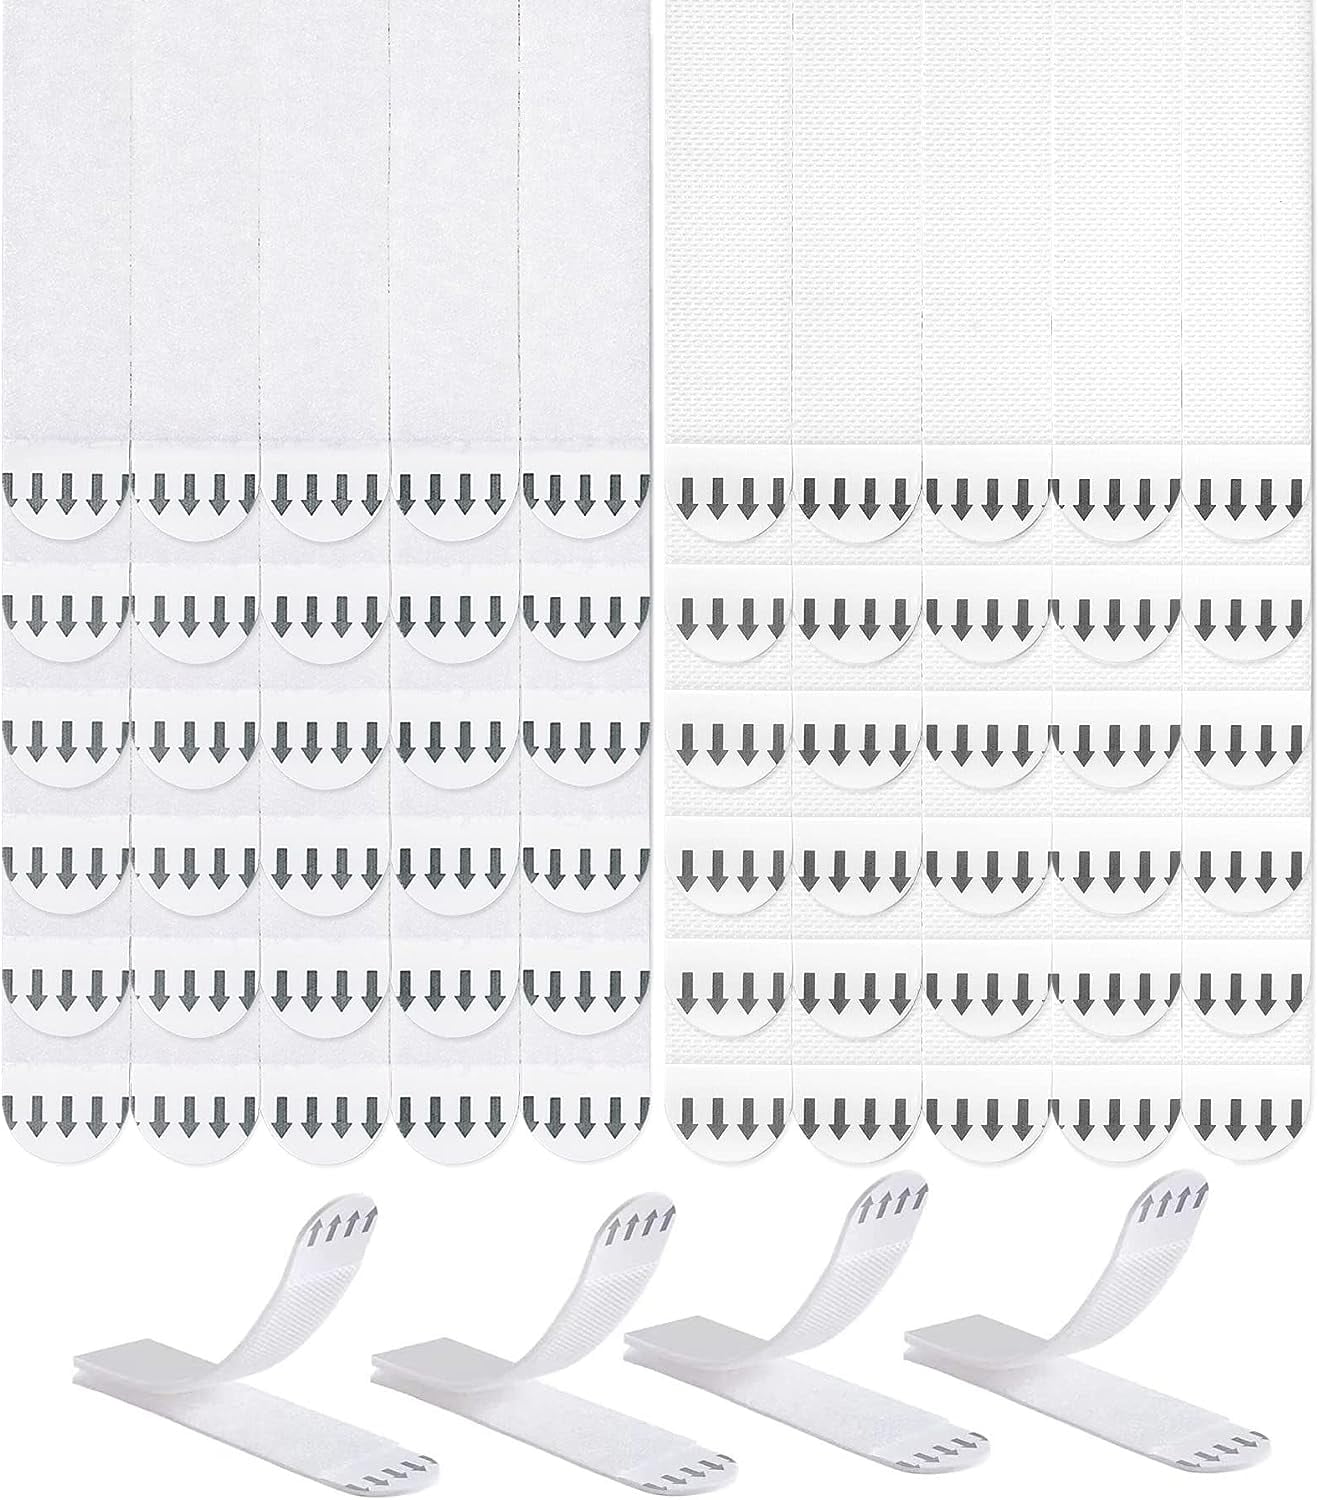 Large Picture Hanging Strips Heavy Duty,20-Pairs(40 Strips)Sticky Picture Hangers for Walls,Hanging Pictures Without Nail,Damage Free No Nails